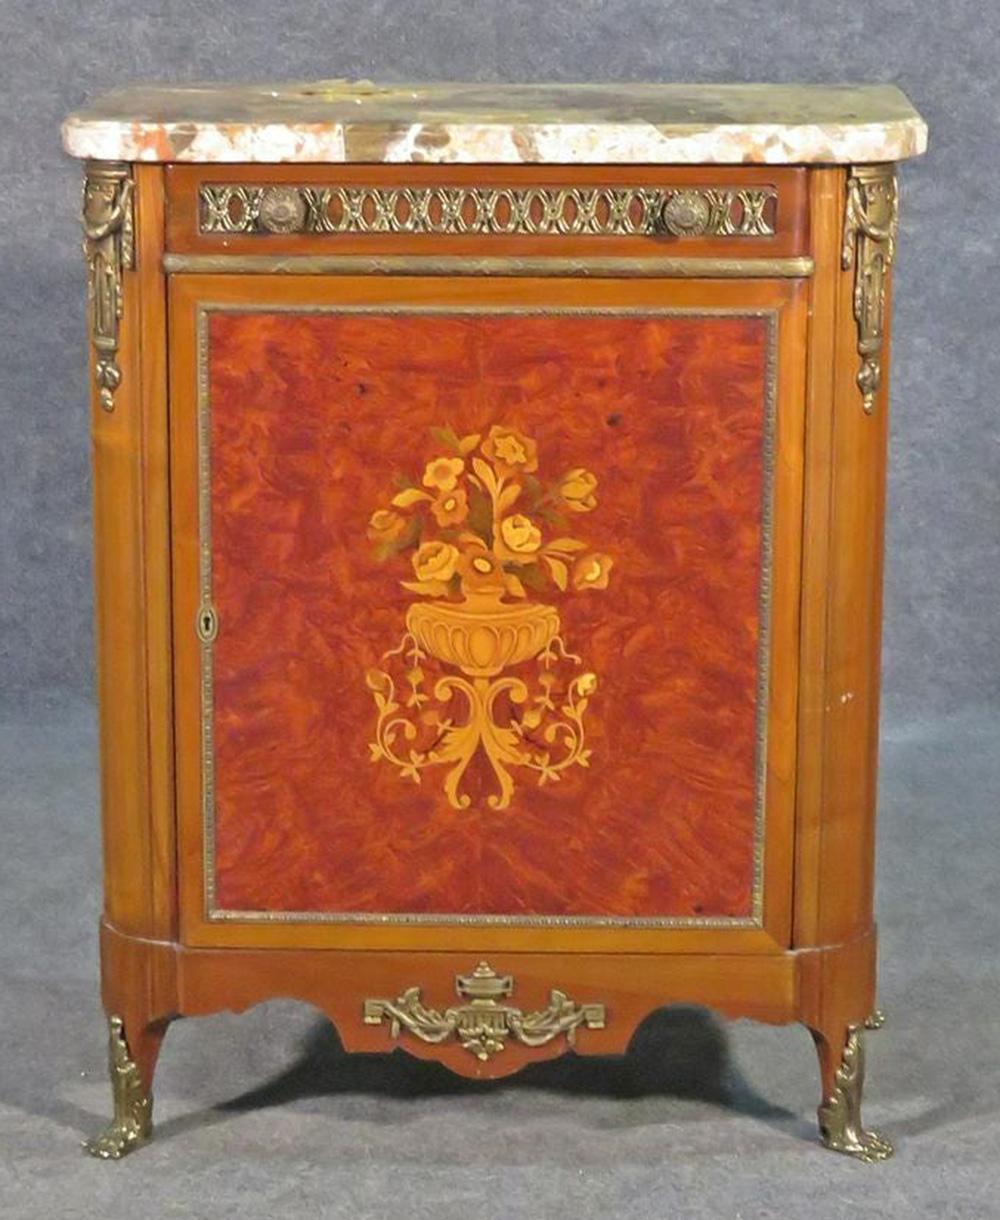 Walnut Sormani Style Inlaid Marble Top Side Cabinet with Bronze Mounts, Circa 1940